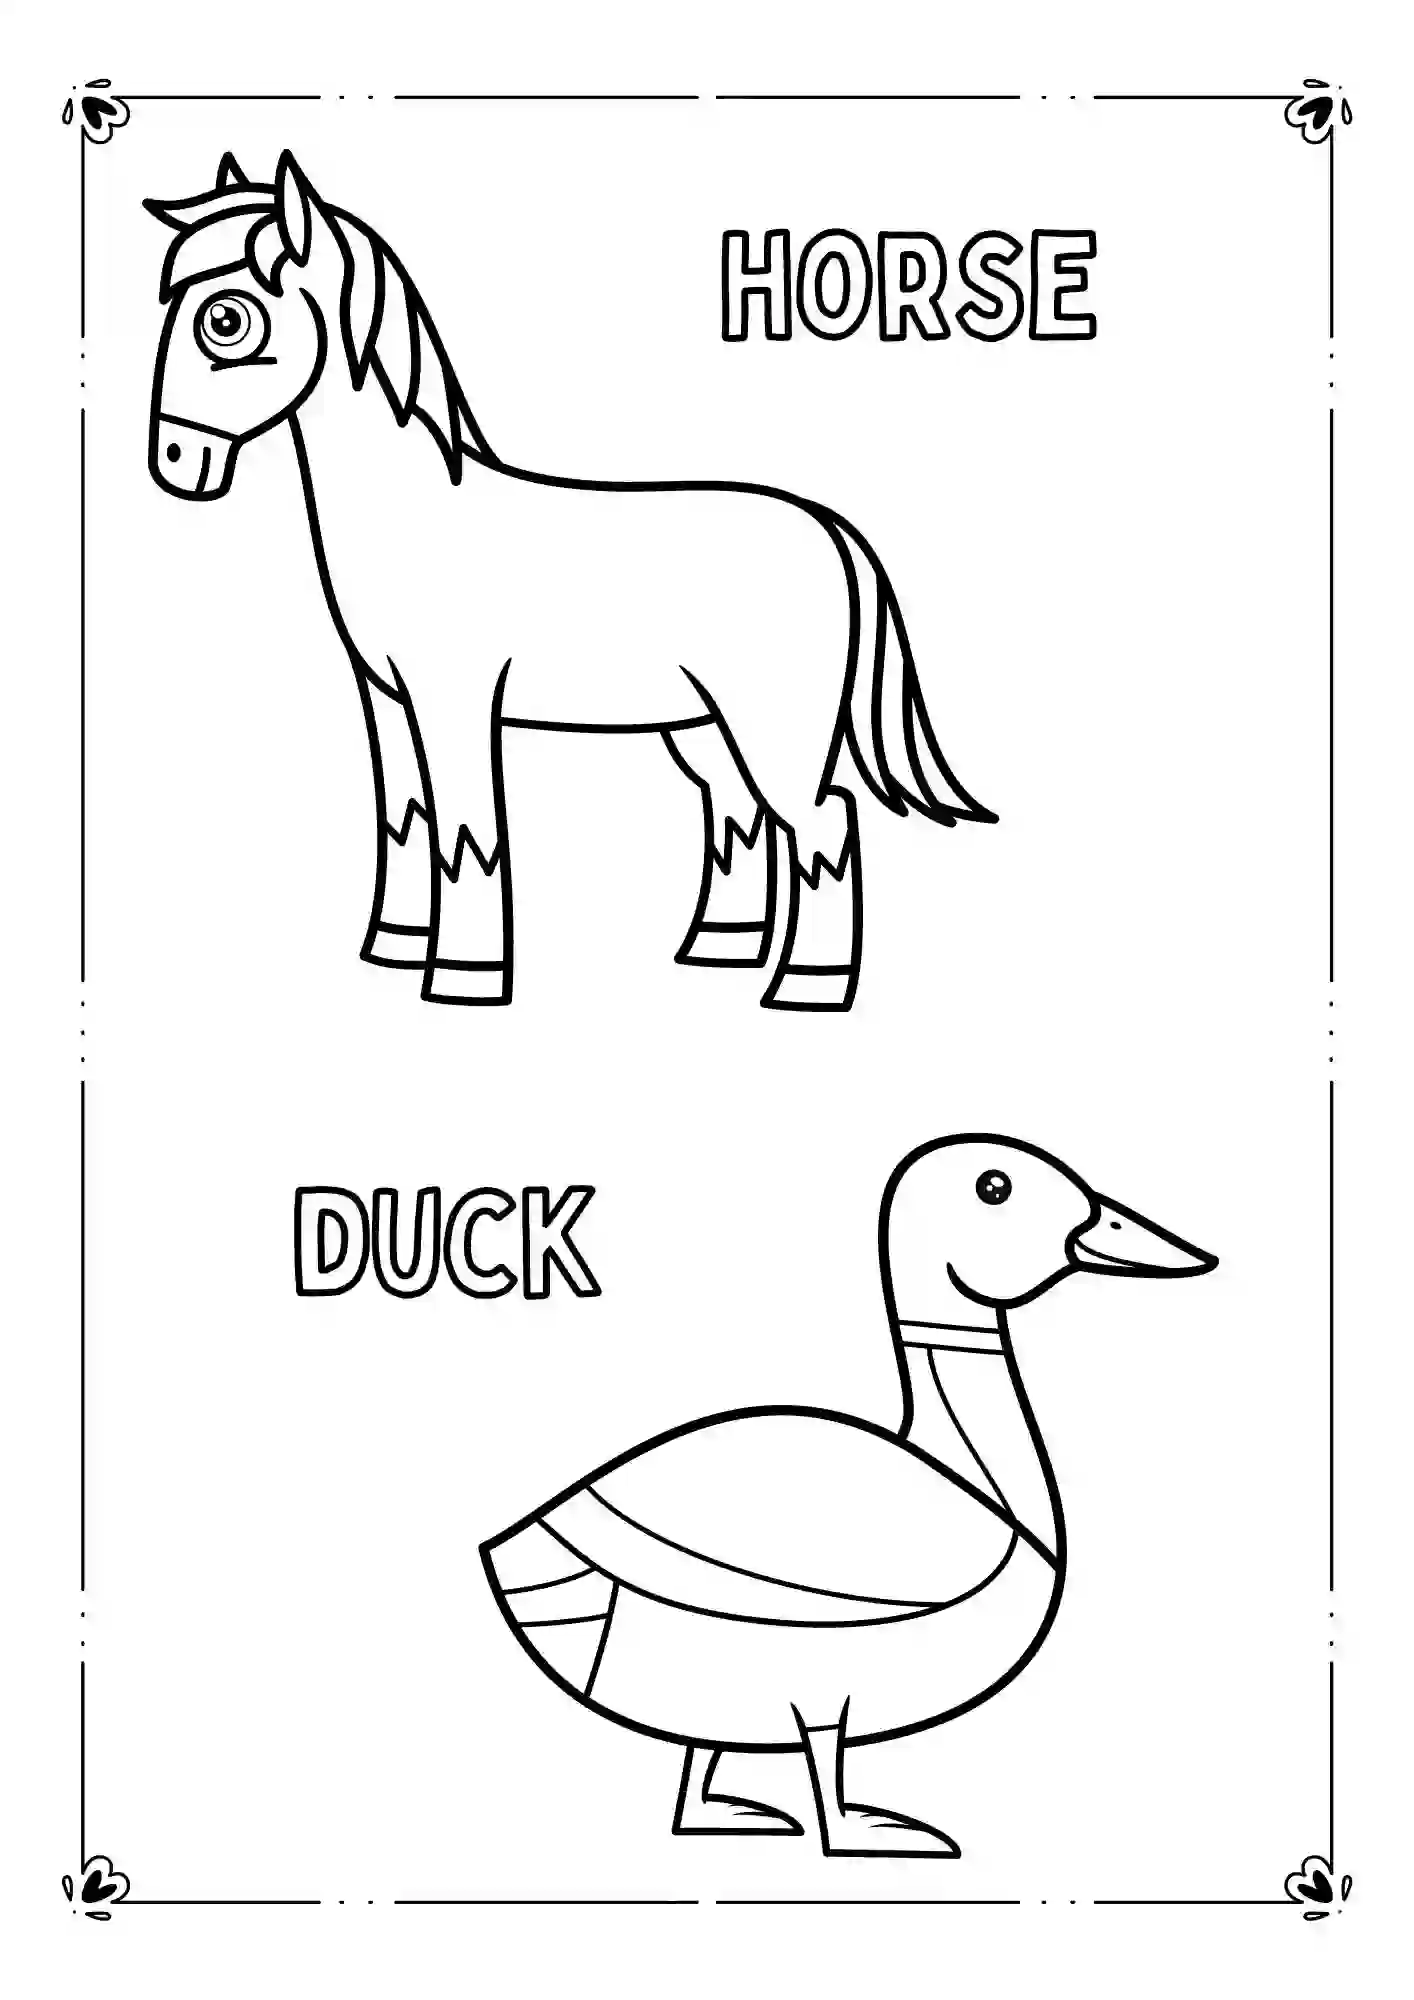 Farm Animals Coloring Worksheets (DUCK & HORSE)